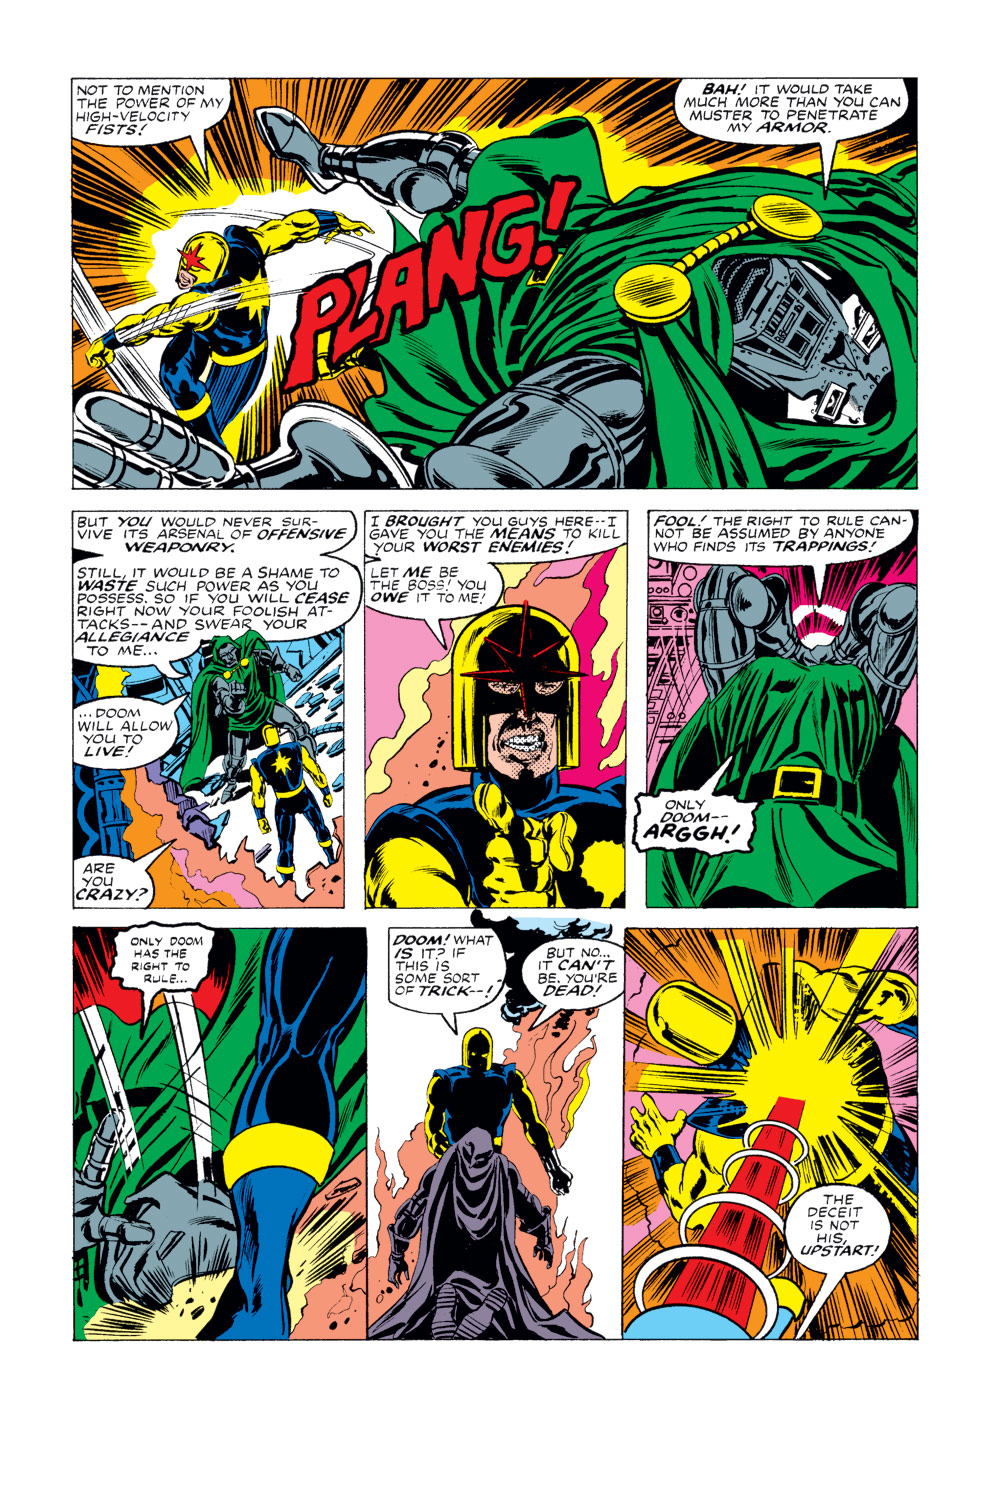 What If? (1977) issue 15 - Nova had been four other people - Page 31